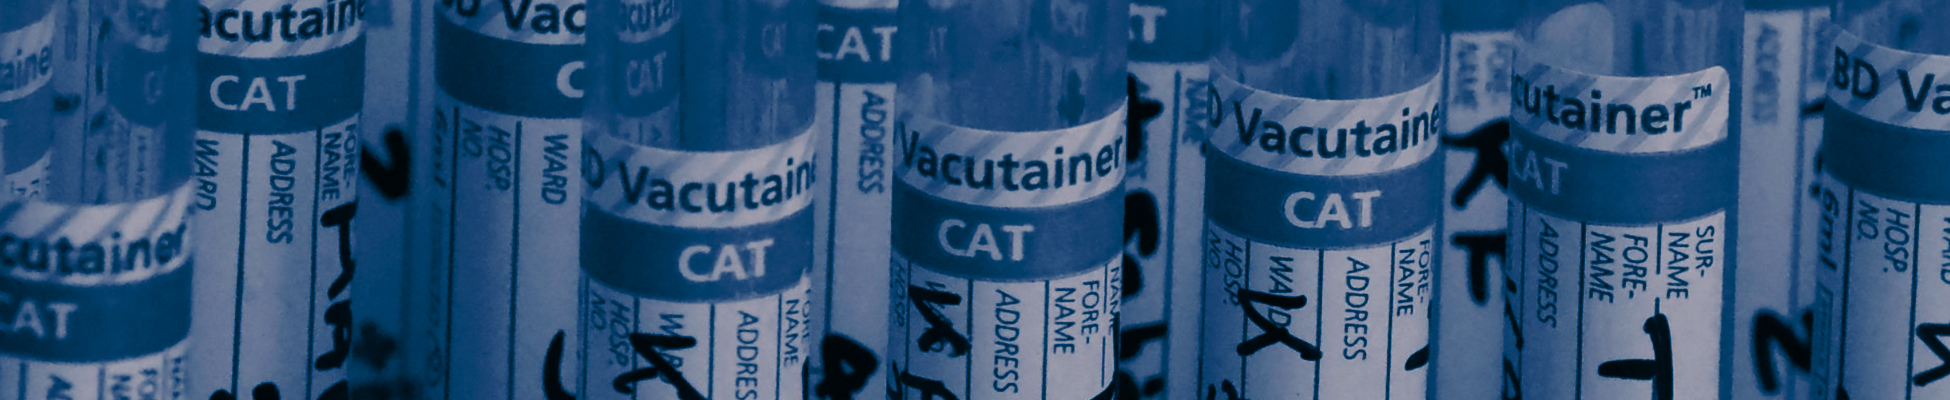 Image of vacutainer tubes Xcene Research CRO Africa